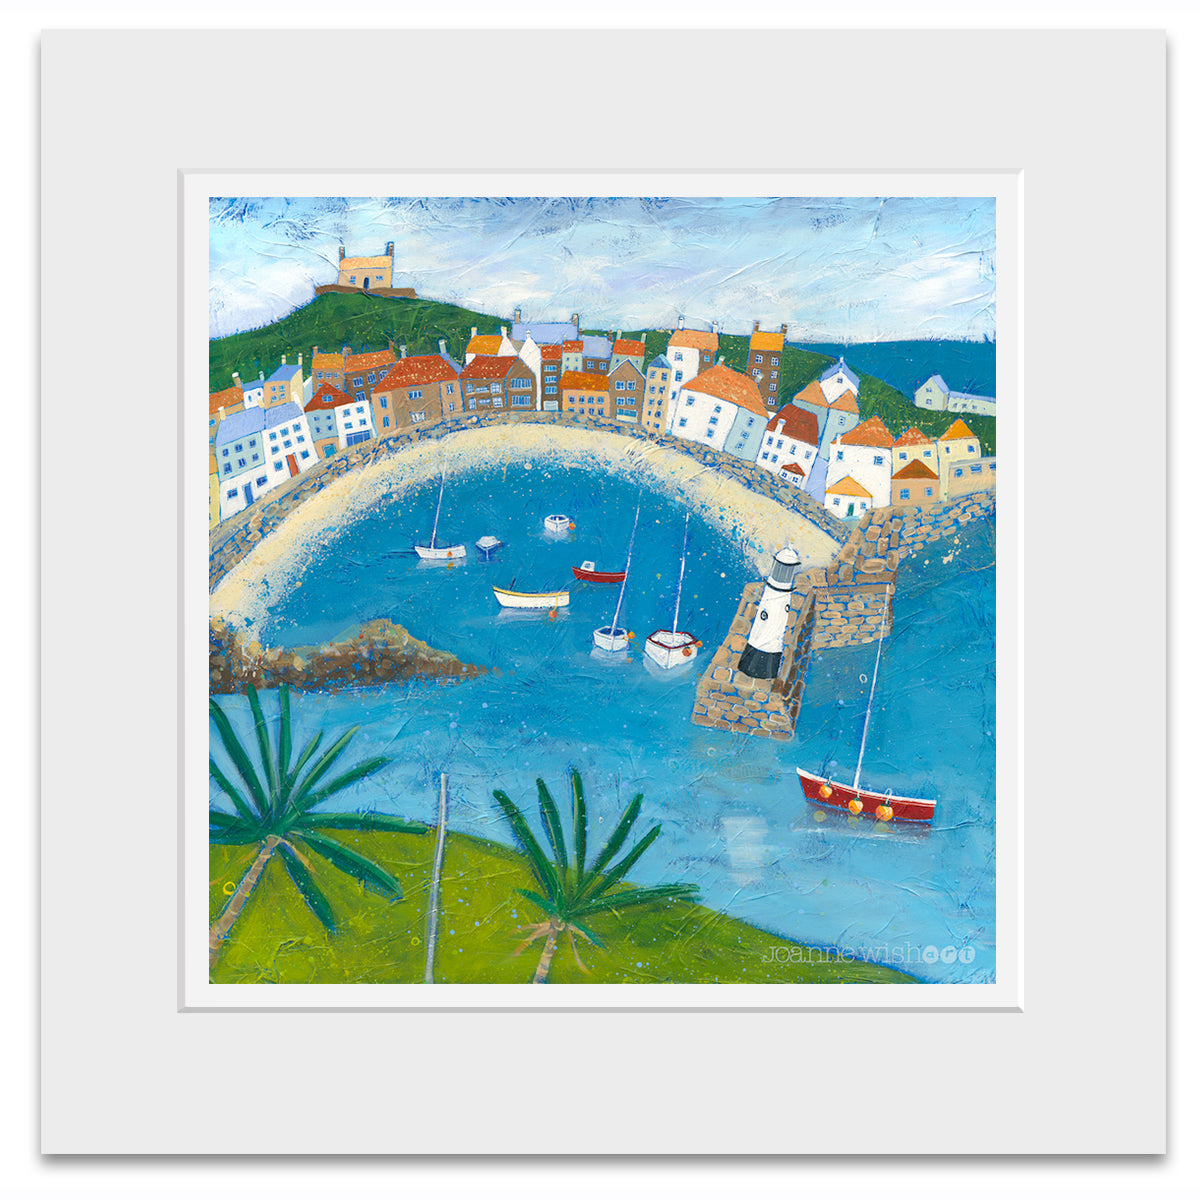 A mounted print of the cornish harbour town of St Ives.